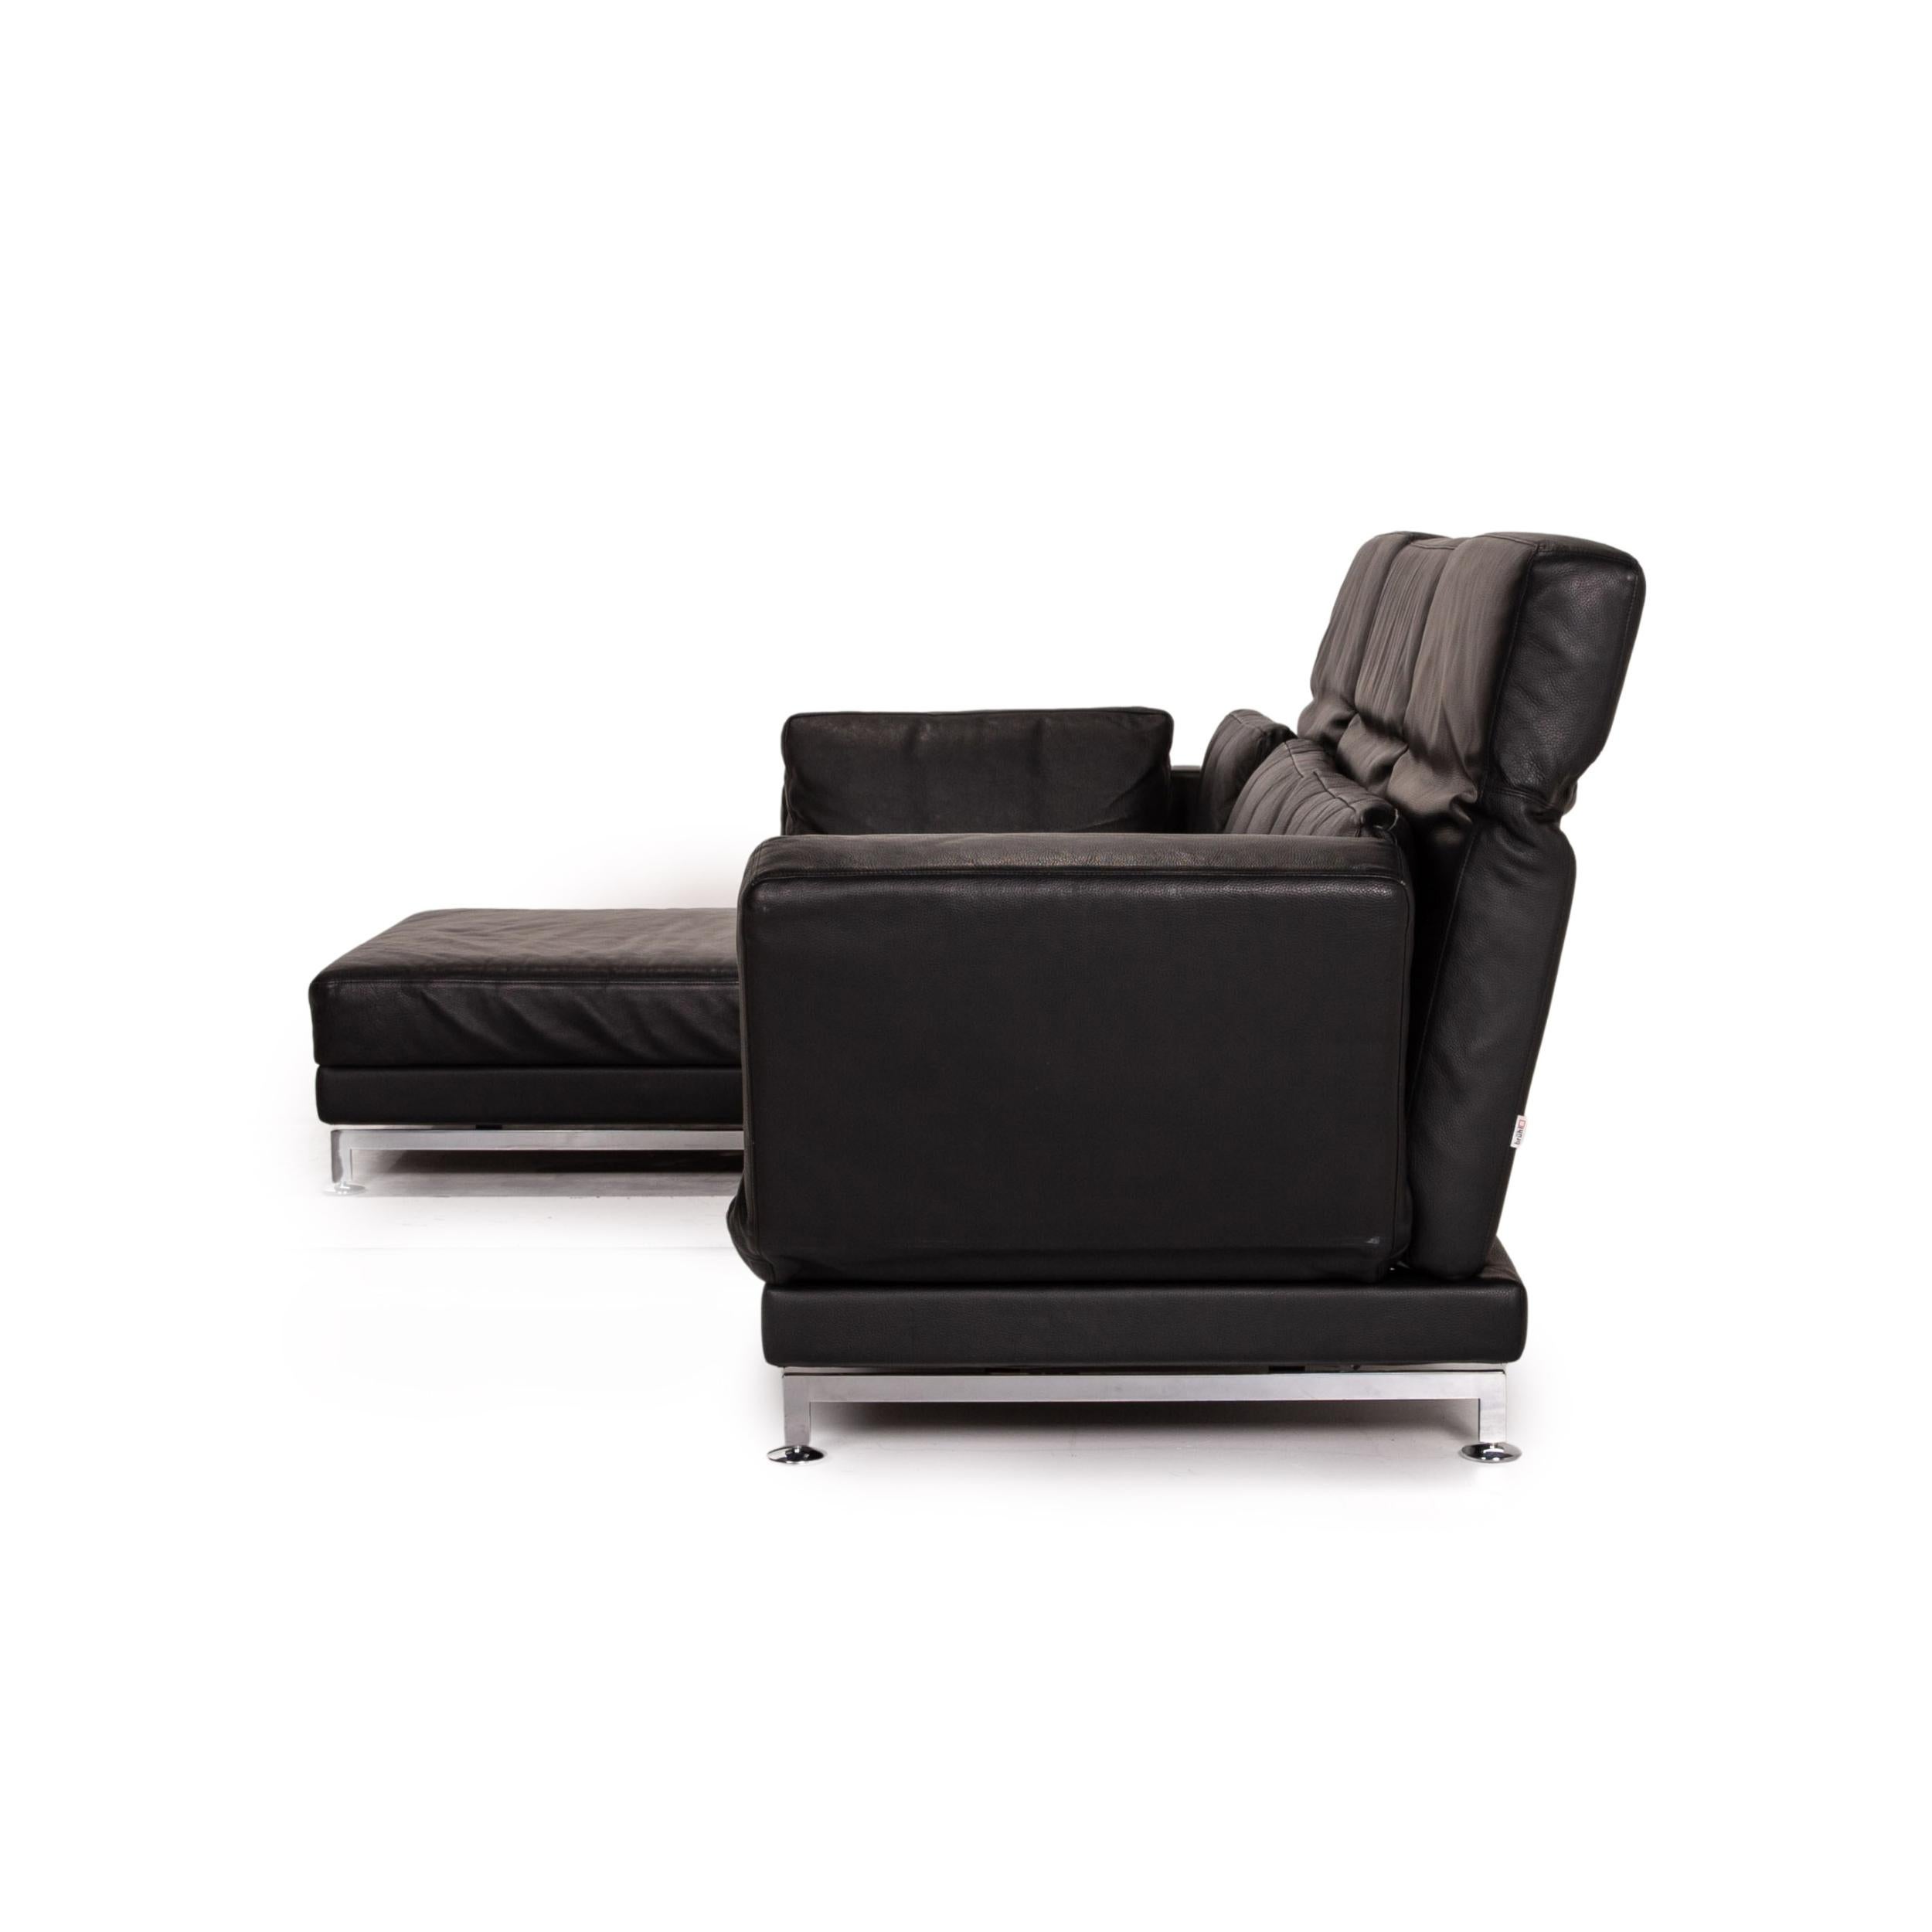 Brühl & Sippold Moule Leather Corner Sofa Black Function Relax Function Couch 7